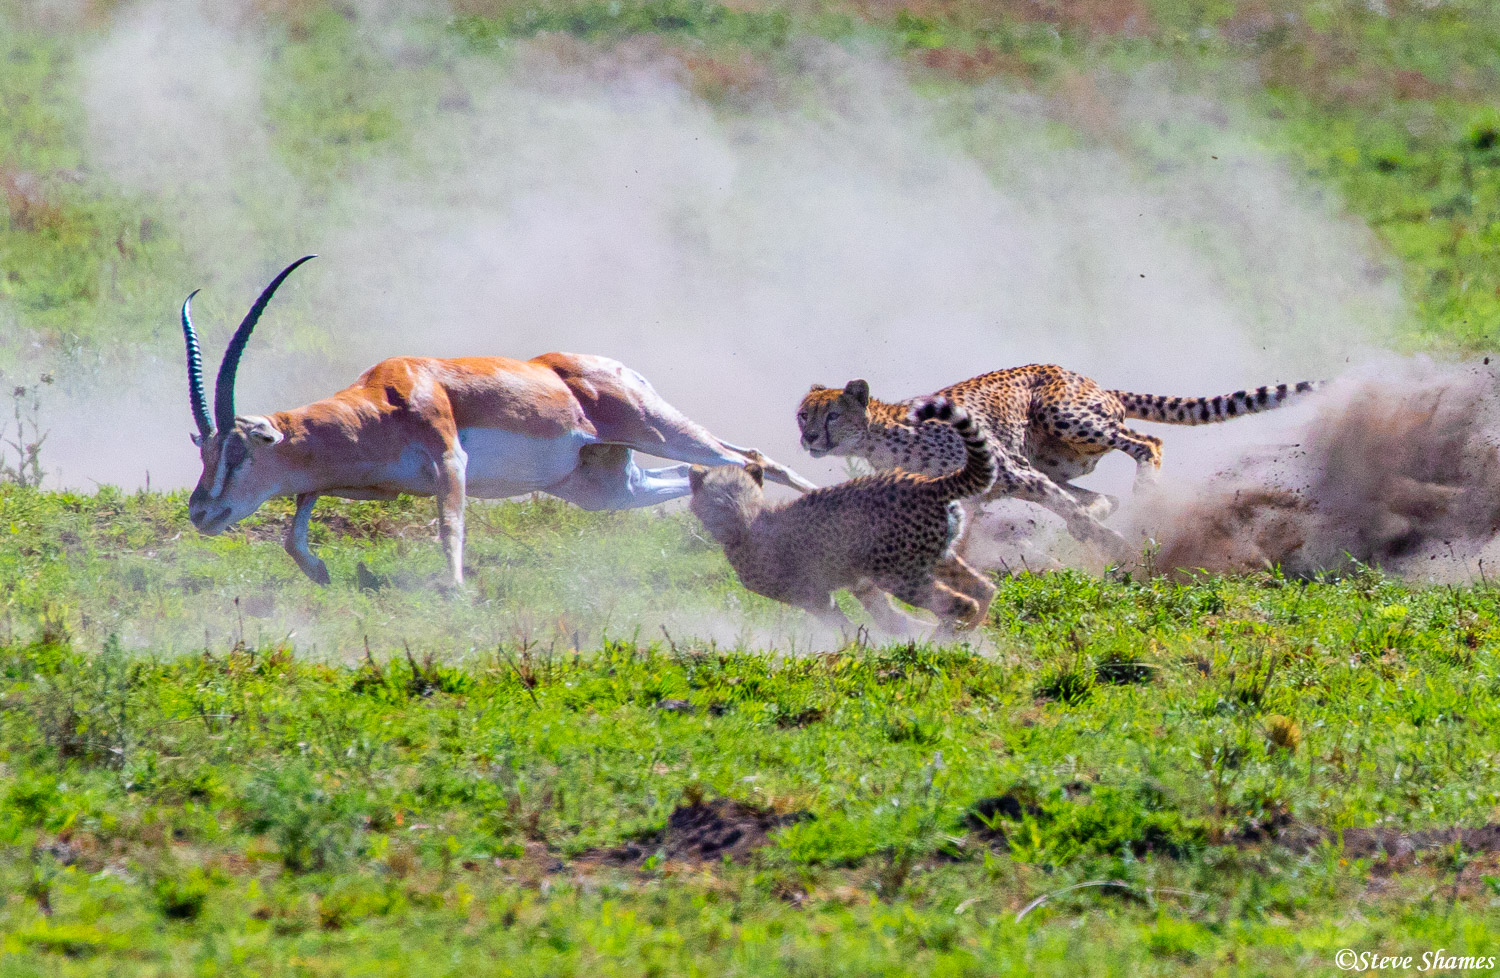 The grant's gazelle was caught by surprise, and now he is running for his life.